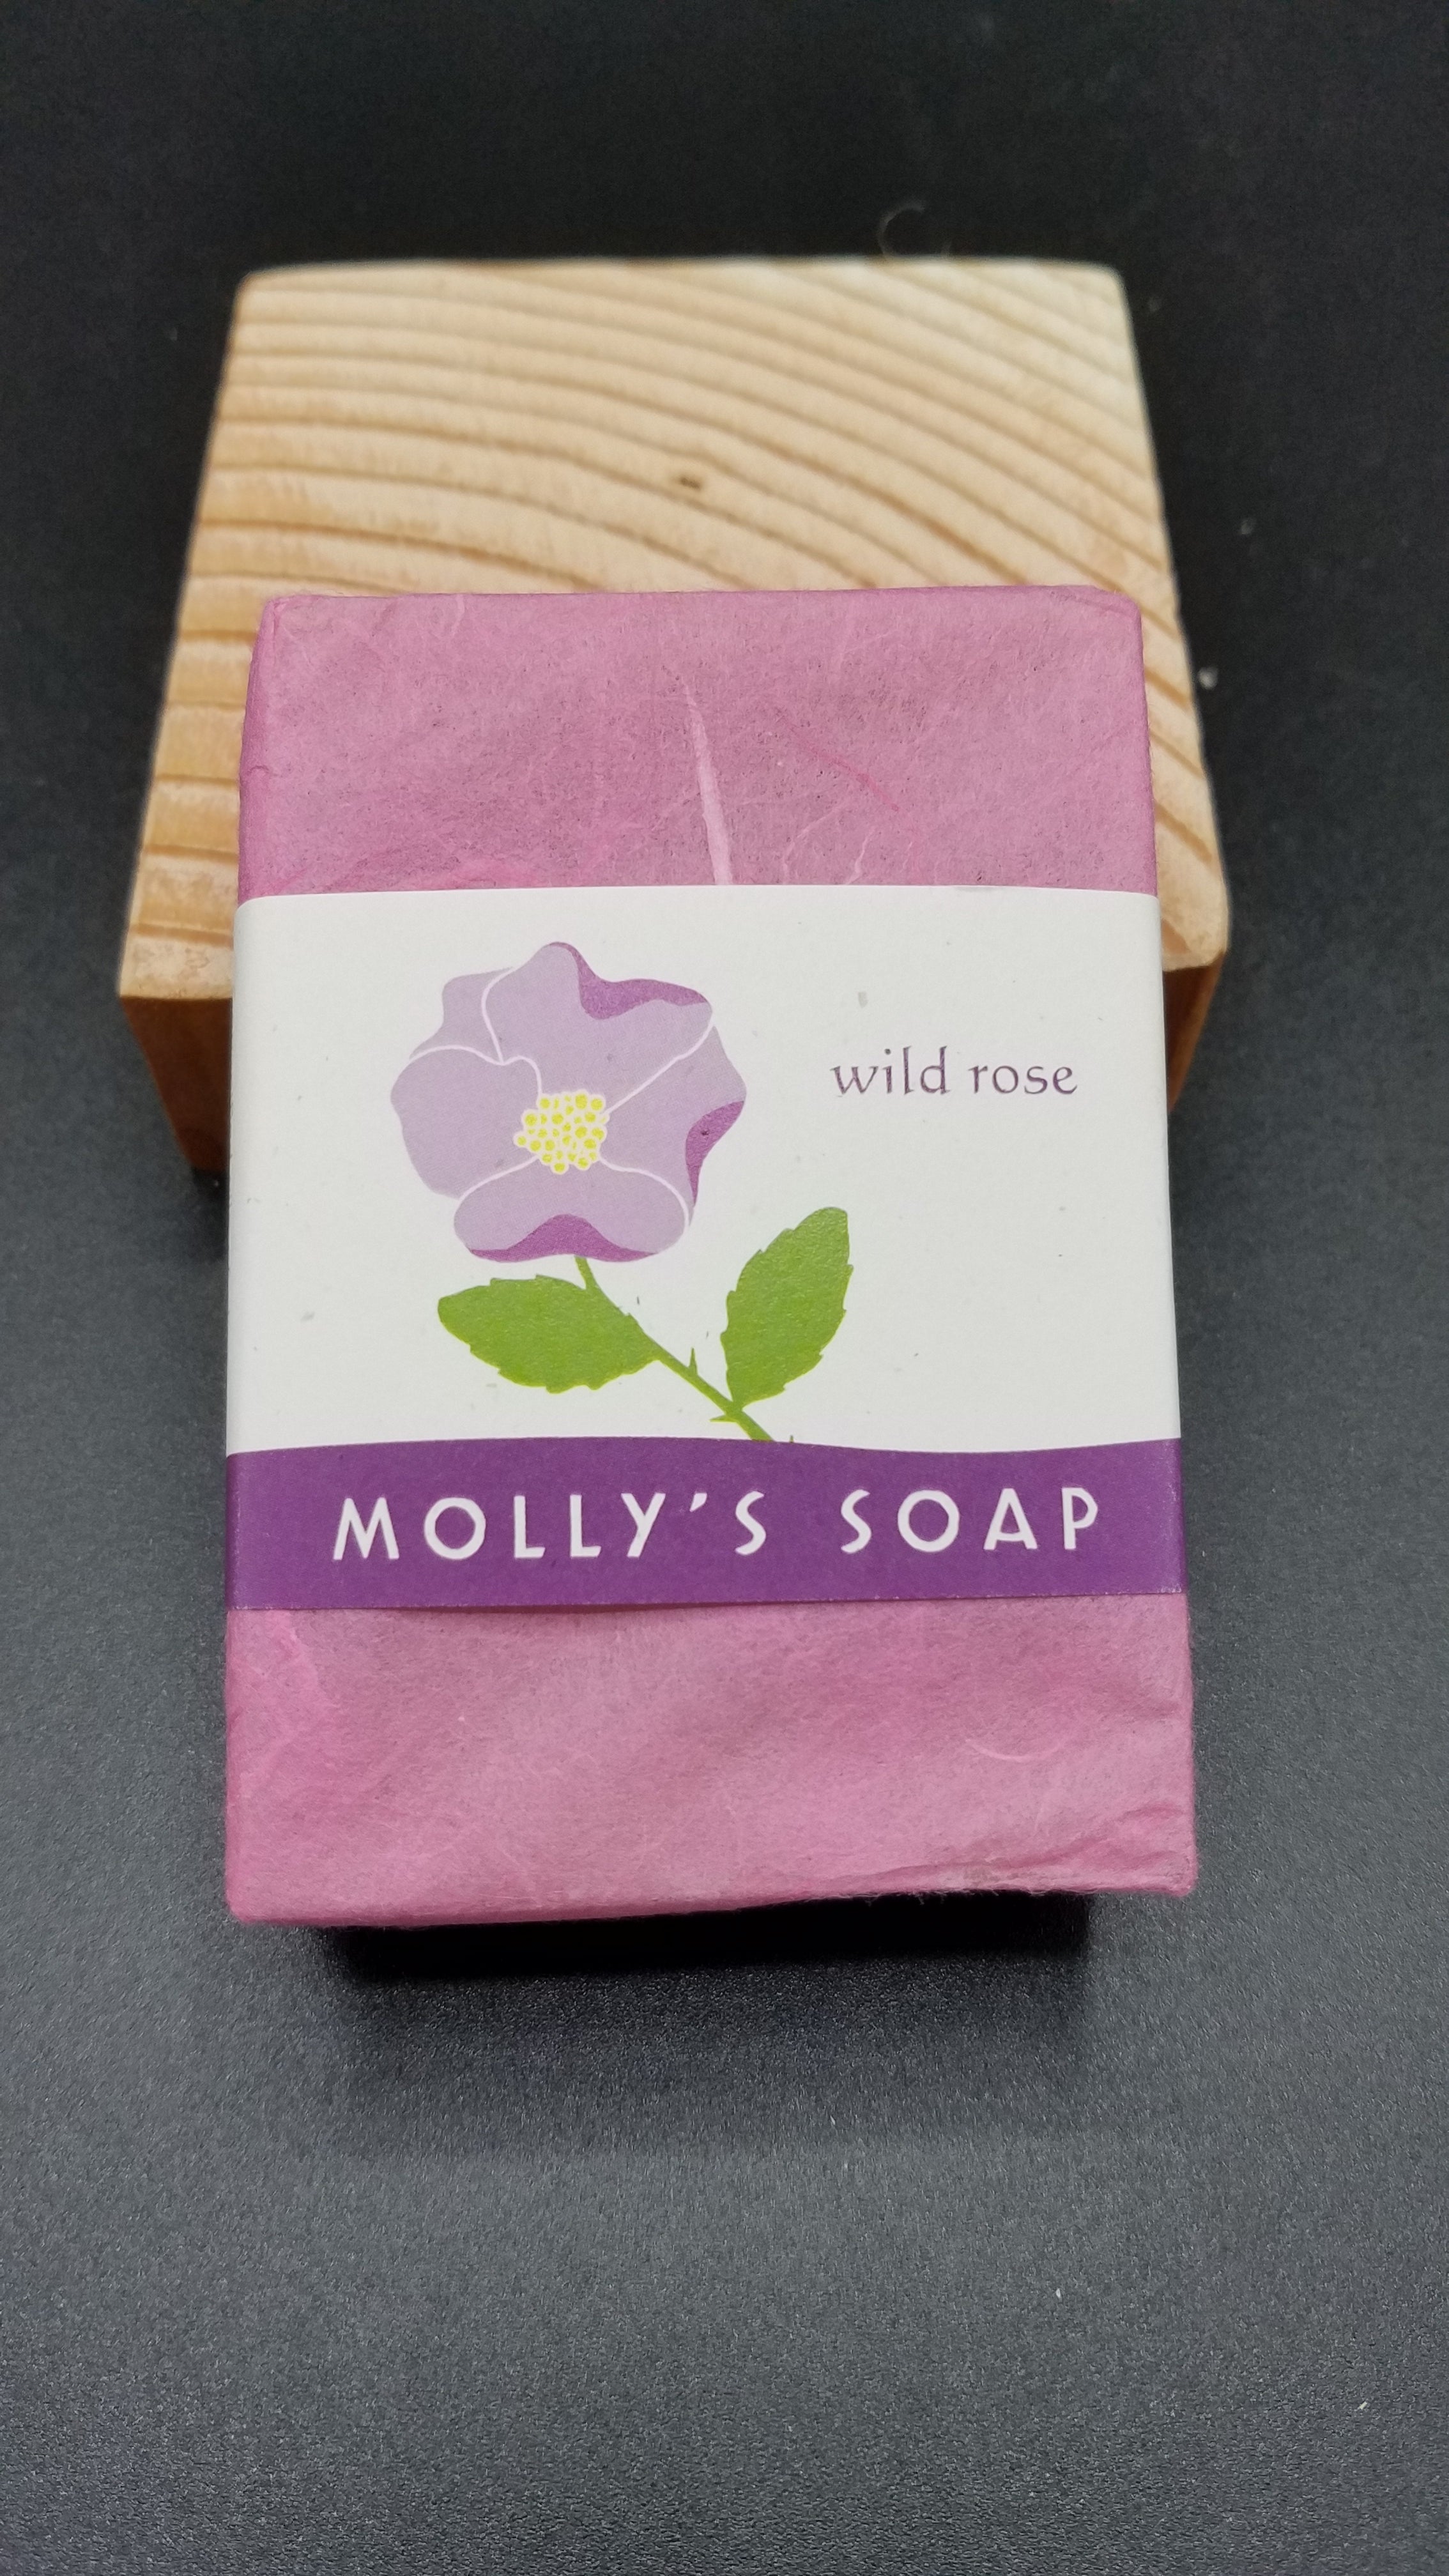 Molly's Soap - Assorted Bars